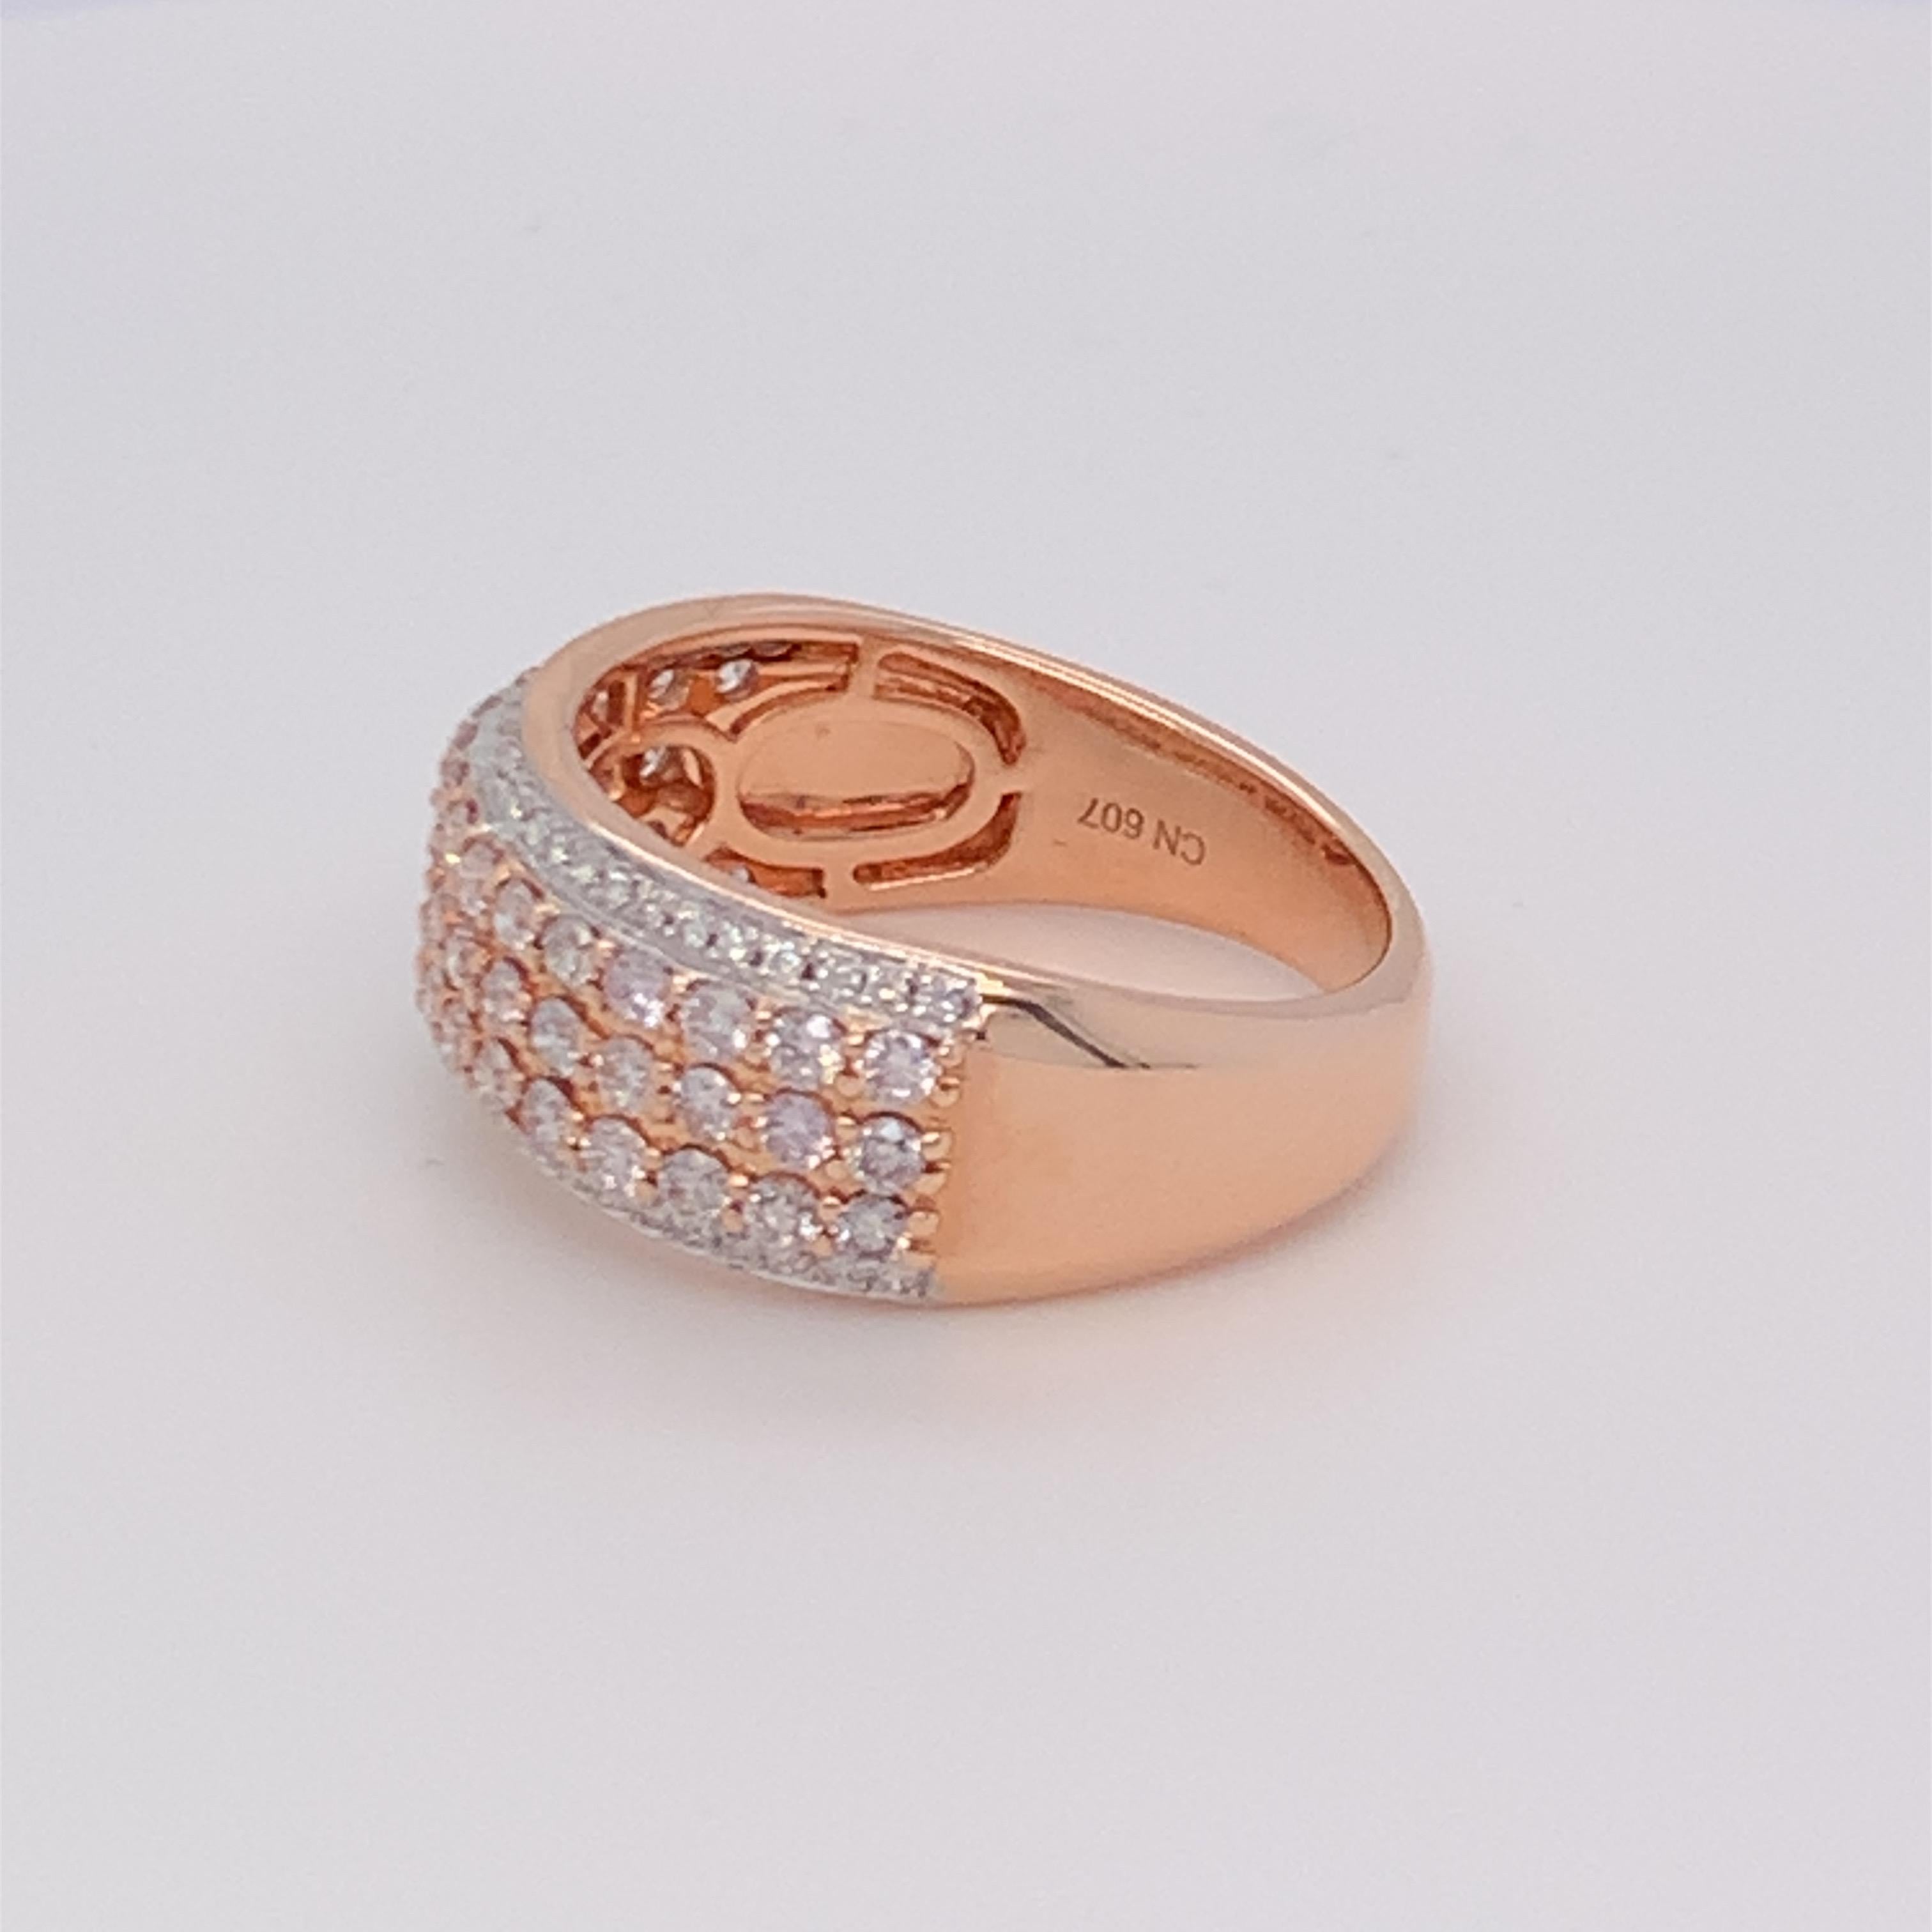 This beautiful five row diamond ring has a combination of pink band in between two rows of white diamonds. Carefully finished with hand by skilled craftsmen and mounted in 14K two tone gold.  
Pink Diamond: 0.80ct
White Diamond: 0.15ct
Gold: 14K Two